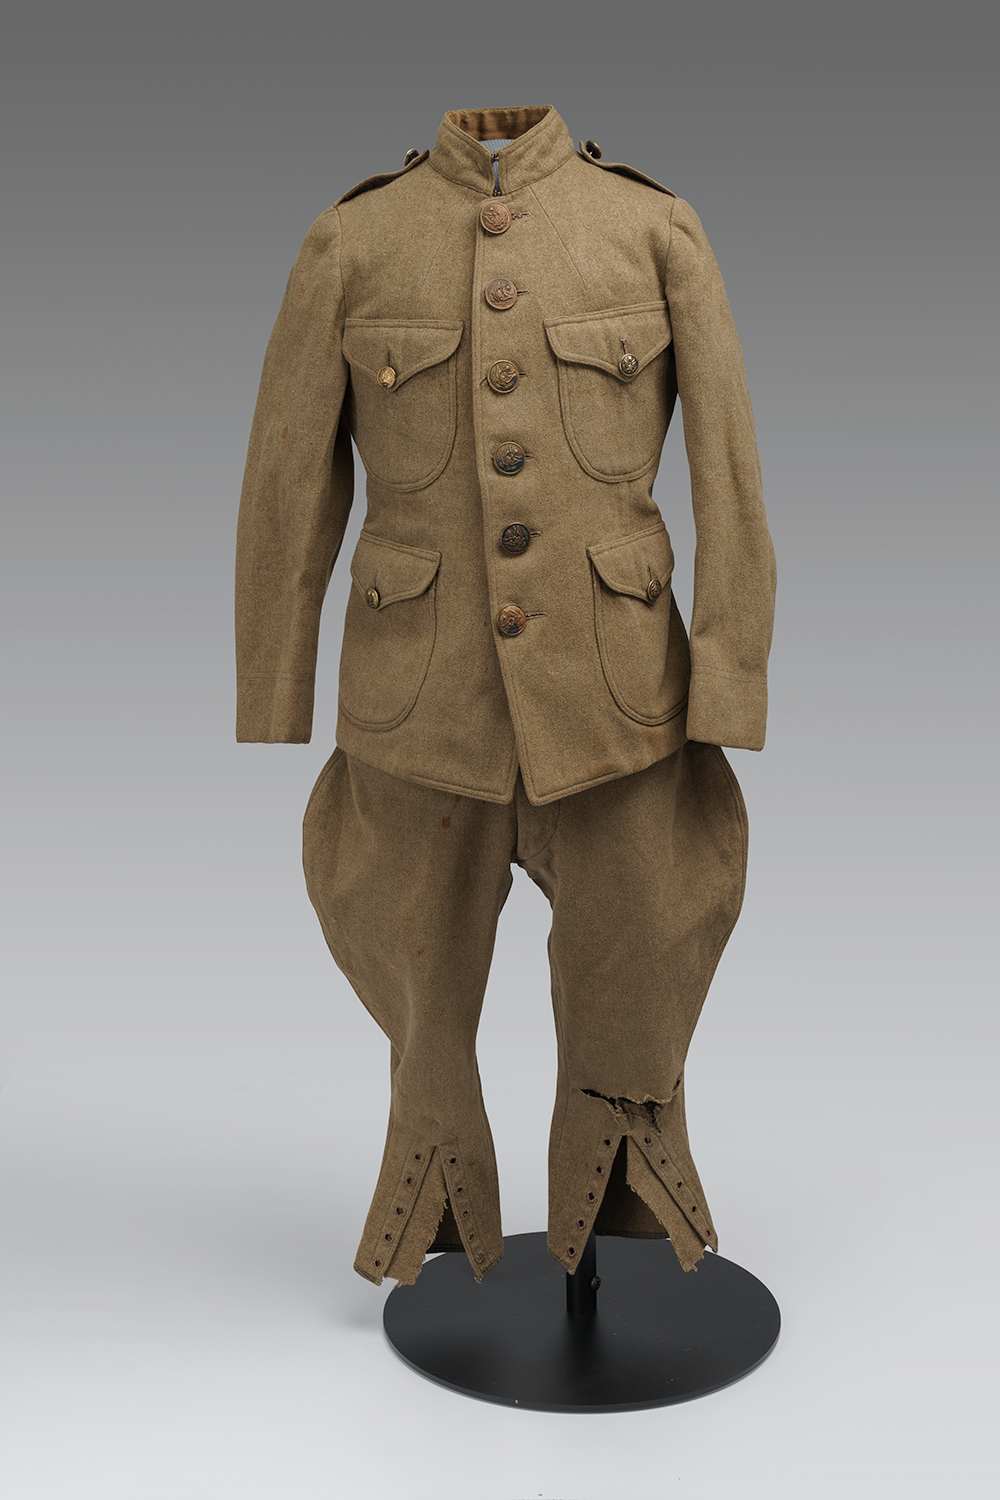 Modern photograph of a child-sized brown military uniform jacket and pants.